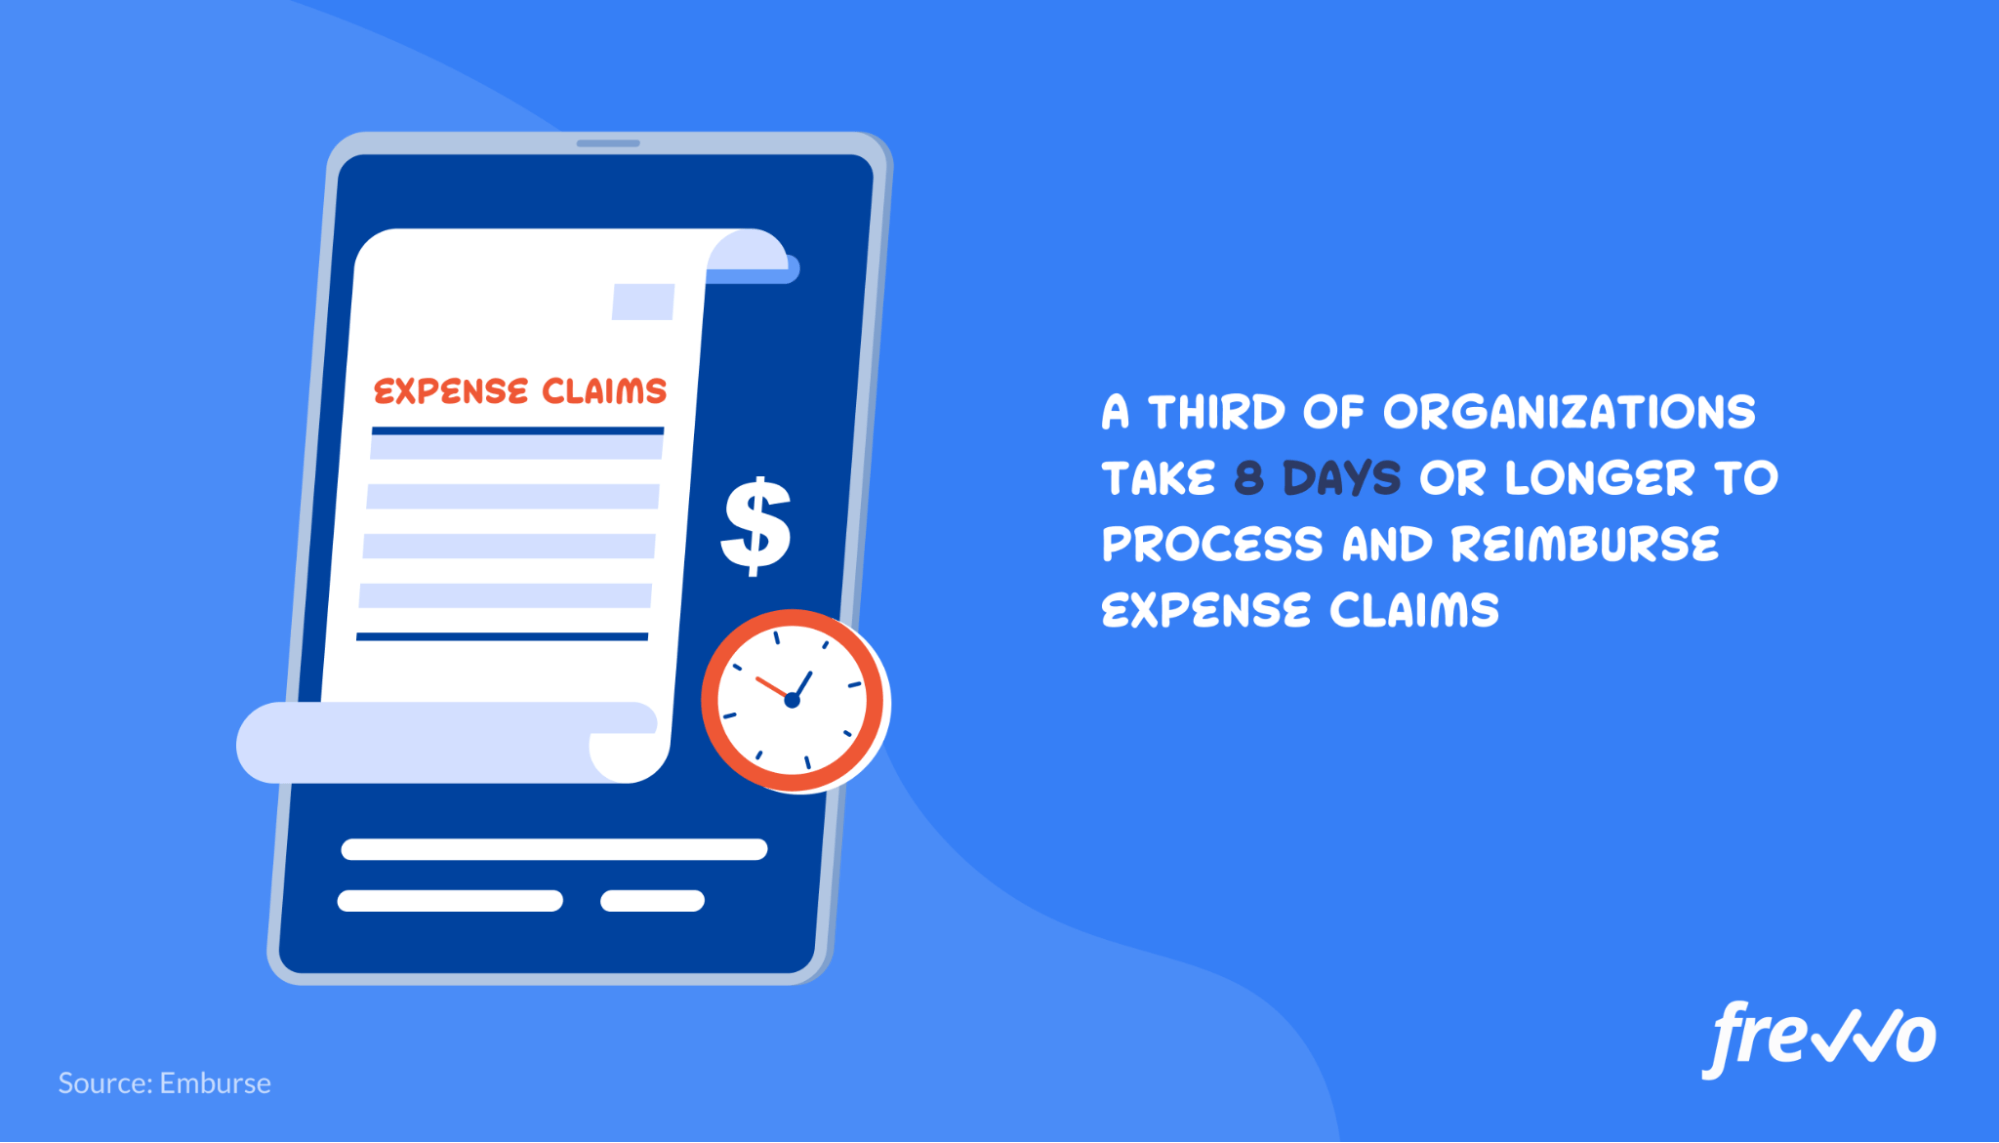 How long it takes to process expense claims